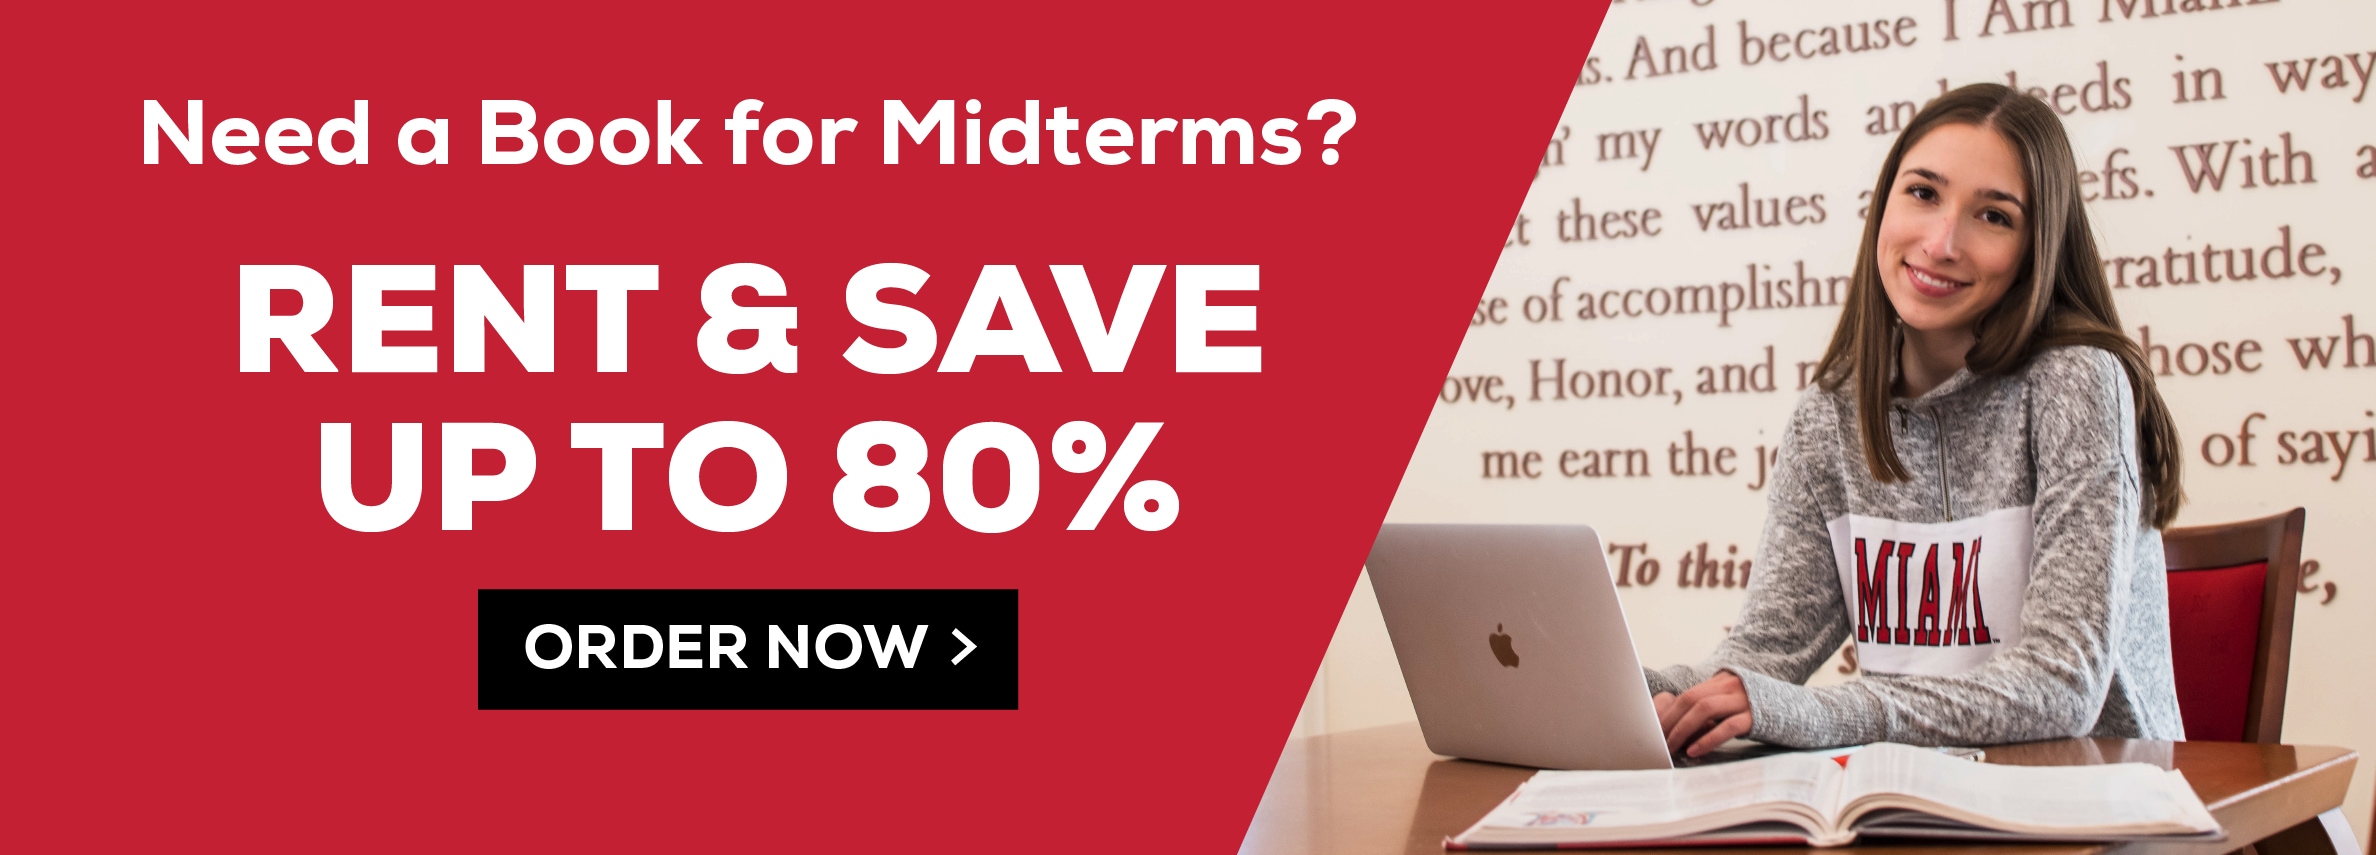 Need a Book for Midterms? RENT & SAVE UP TO 80% ORDER NOW >